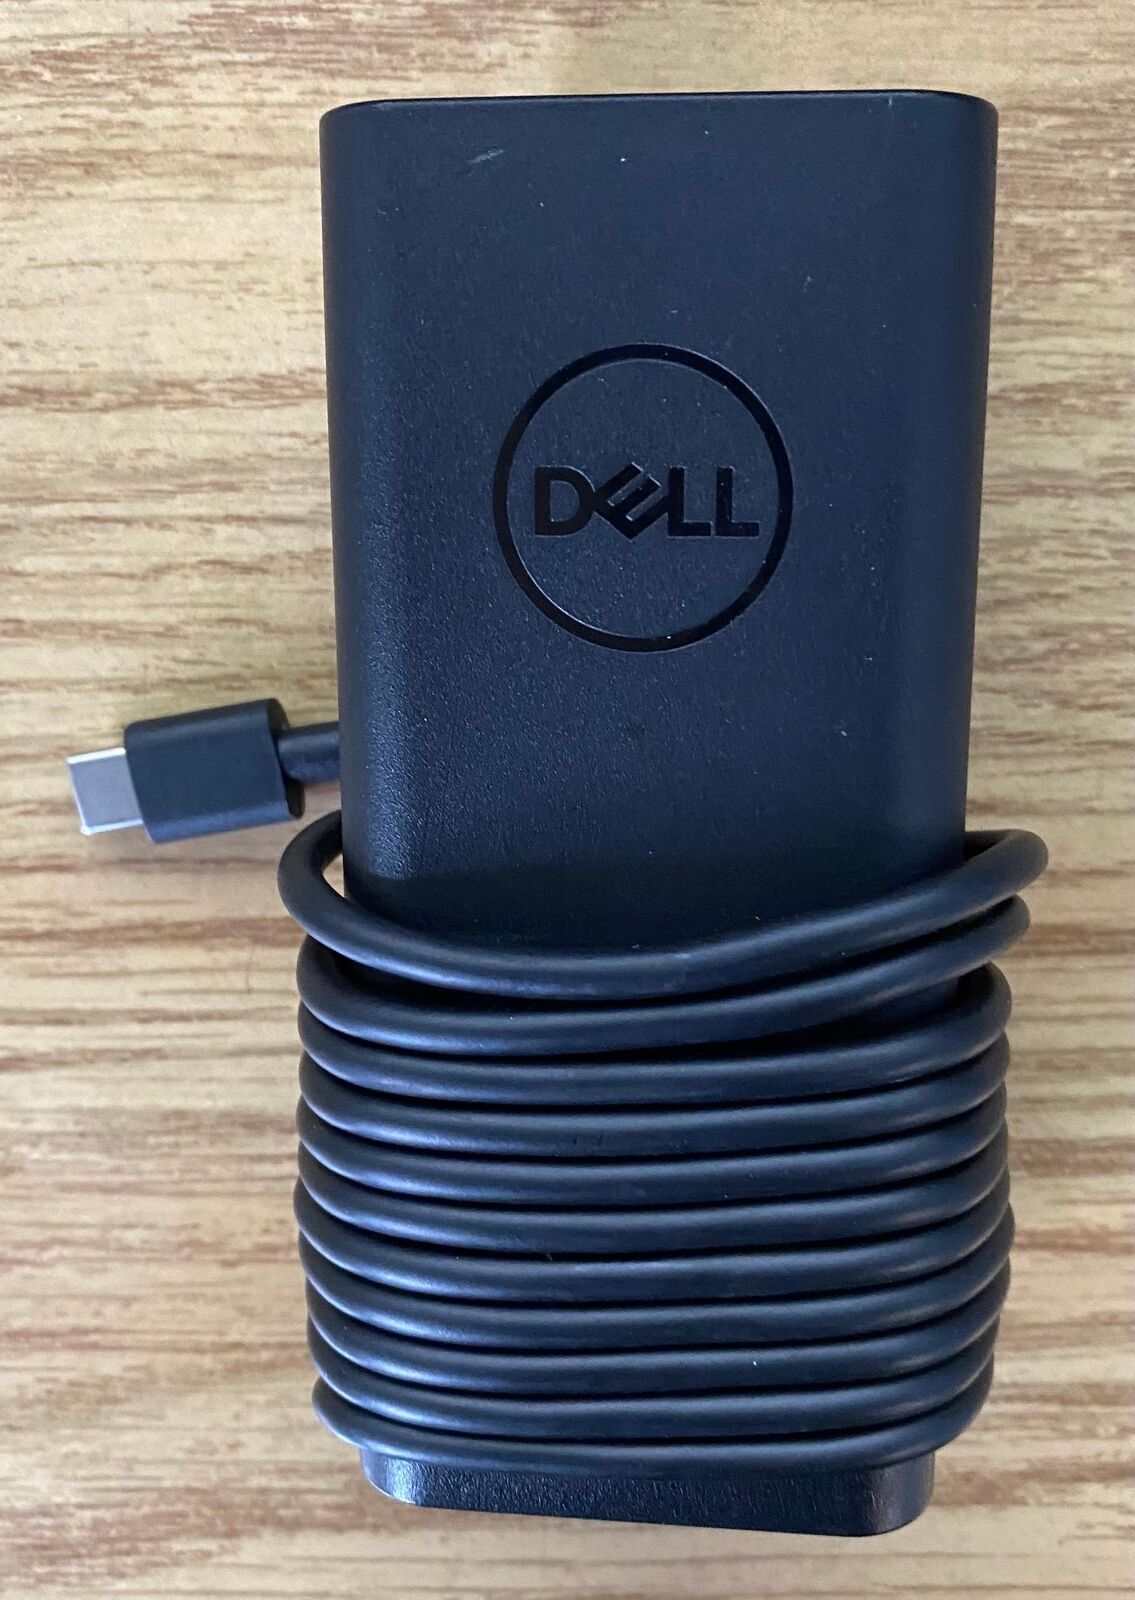 DELL Latitude 14 7000 7410 P131G 65W Genuine Original AC Power Adapter Charger